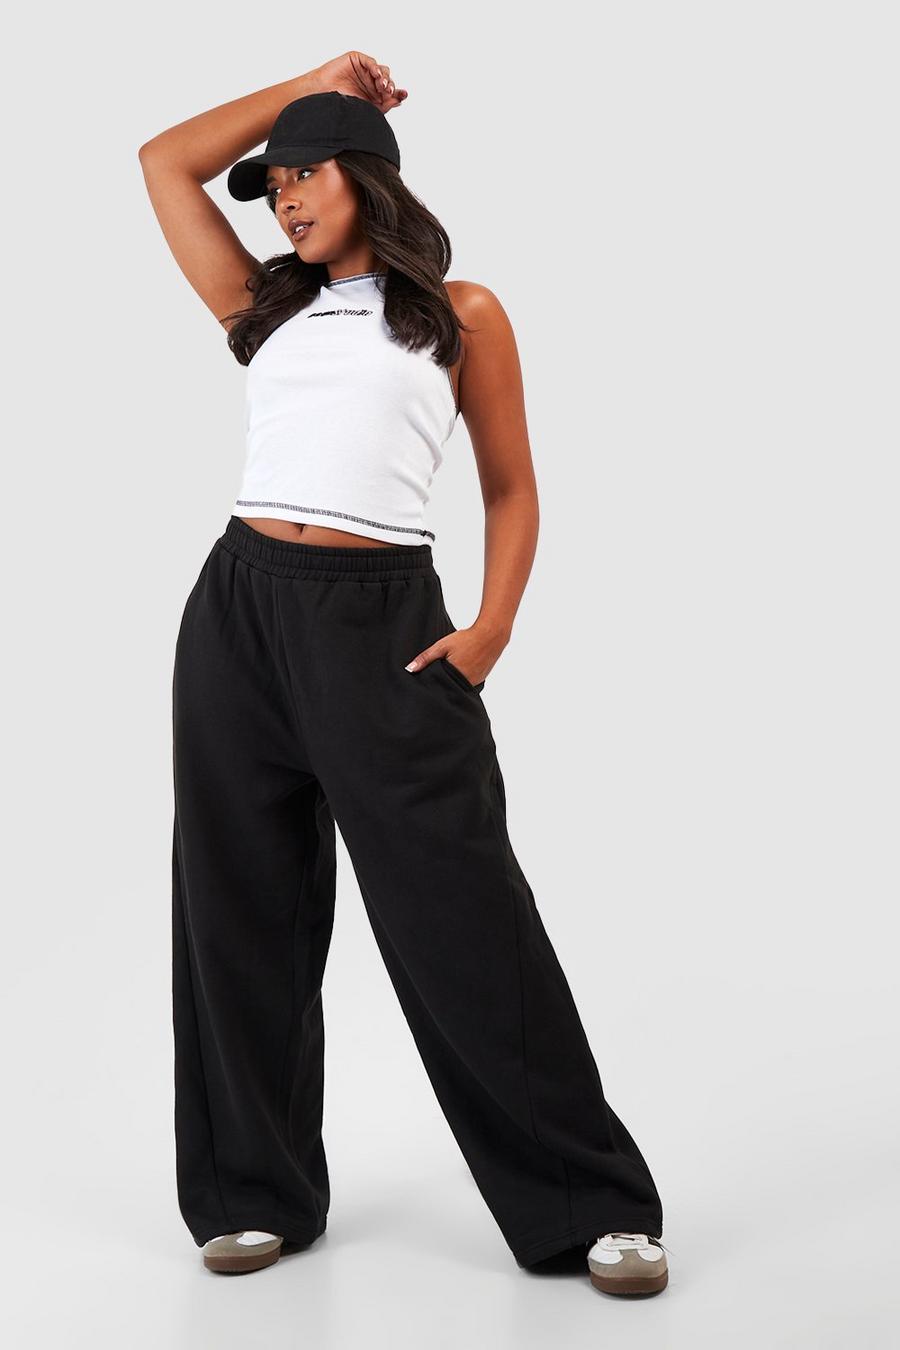 Cotton Plus Size Track Pants For Women - Regular Fit Lowers at Rs 770.00, Ladies Track Pants